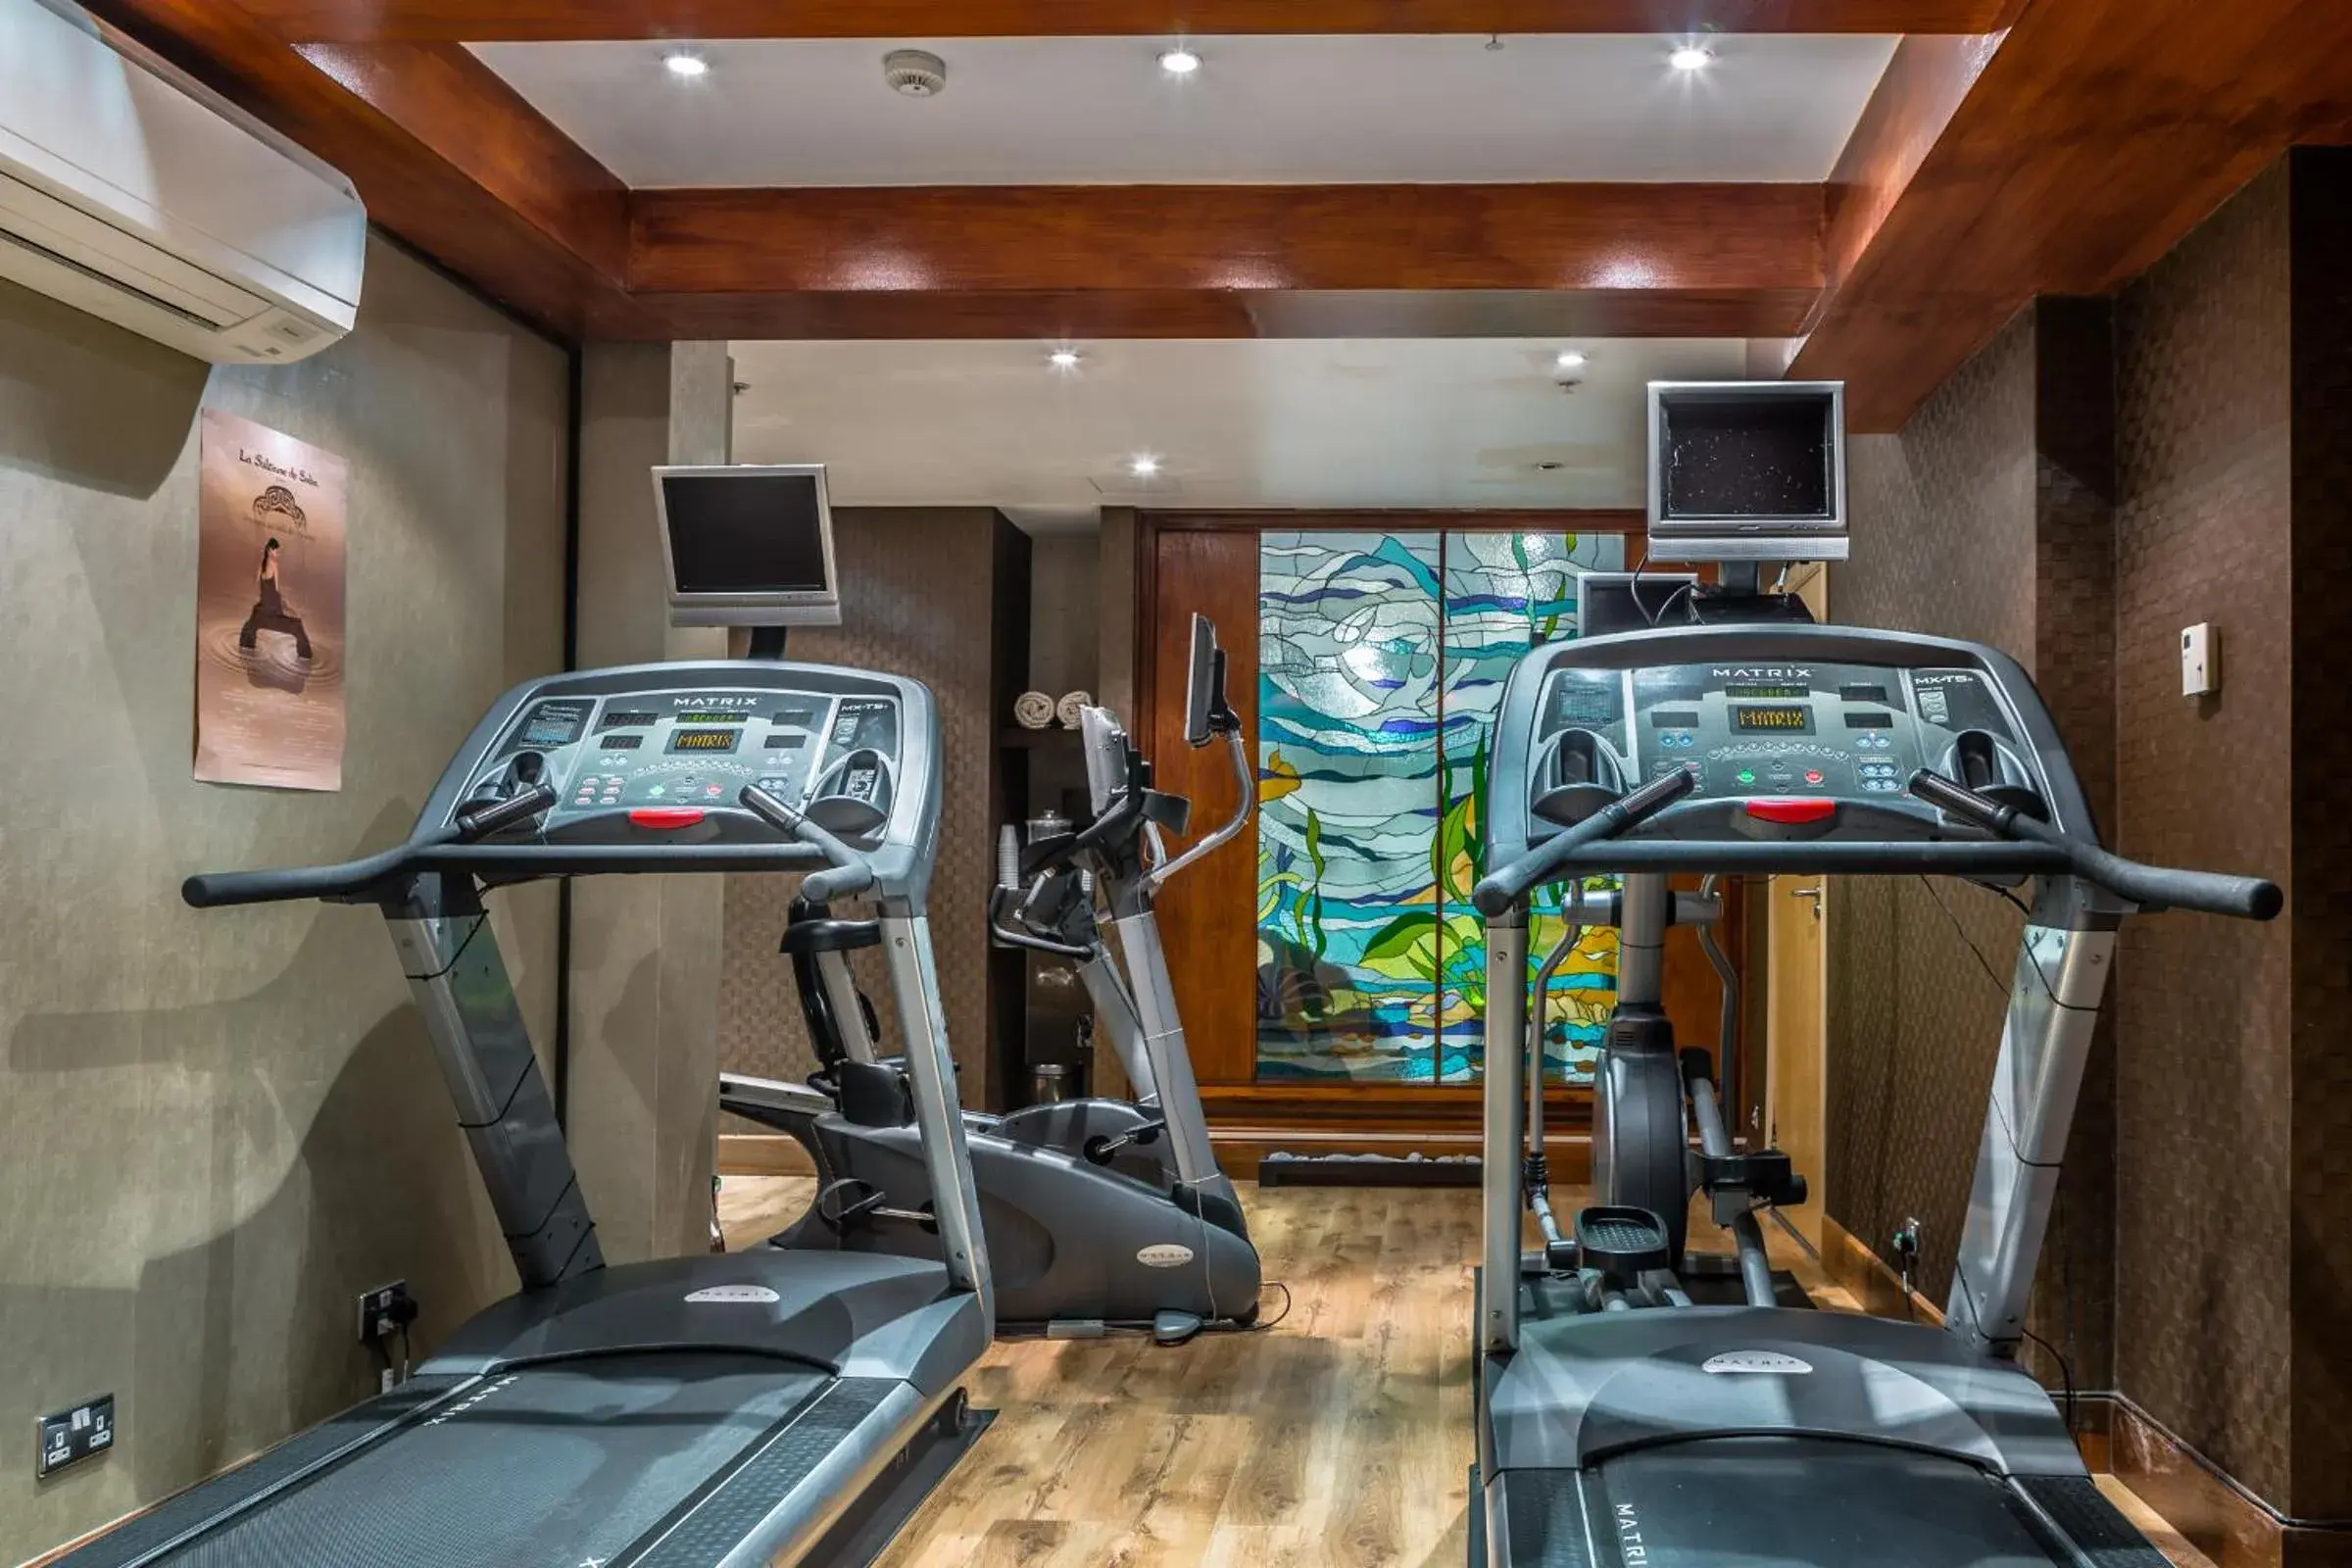 Fitness centre/facilities, Fitness Center/Facilities in Courthouse Hotel London